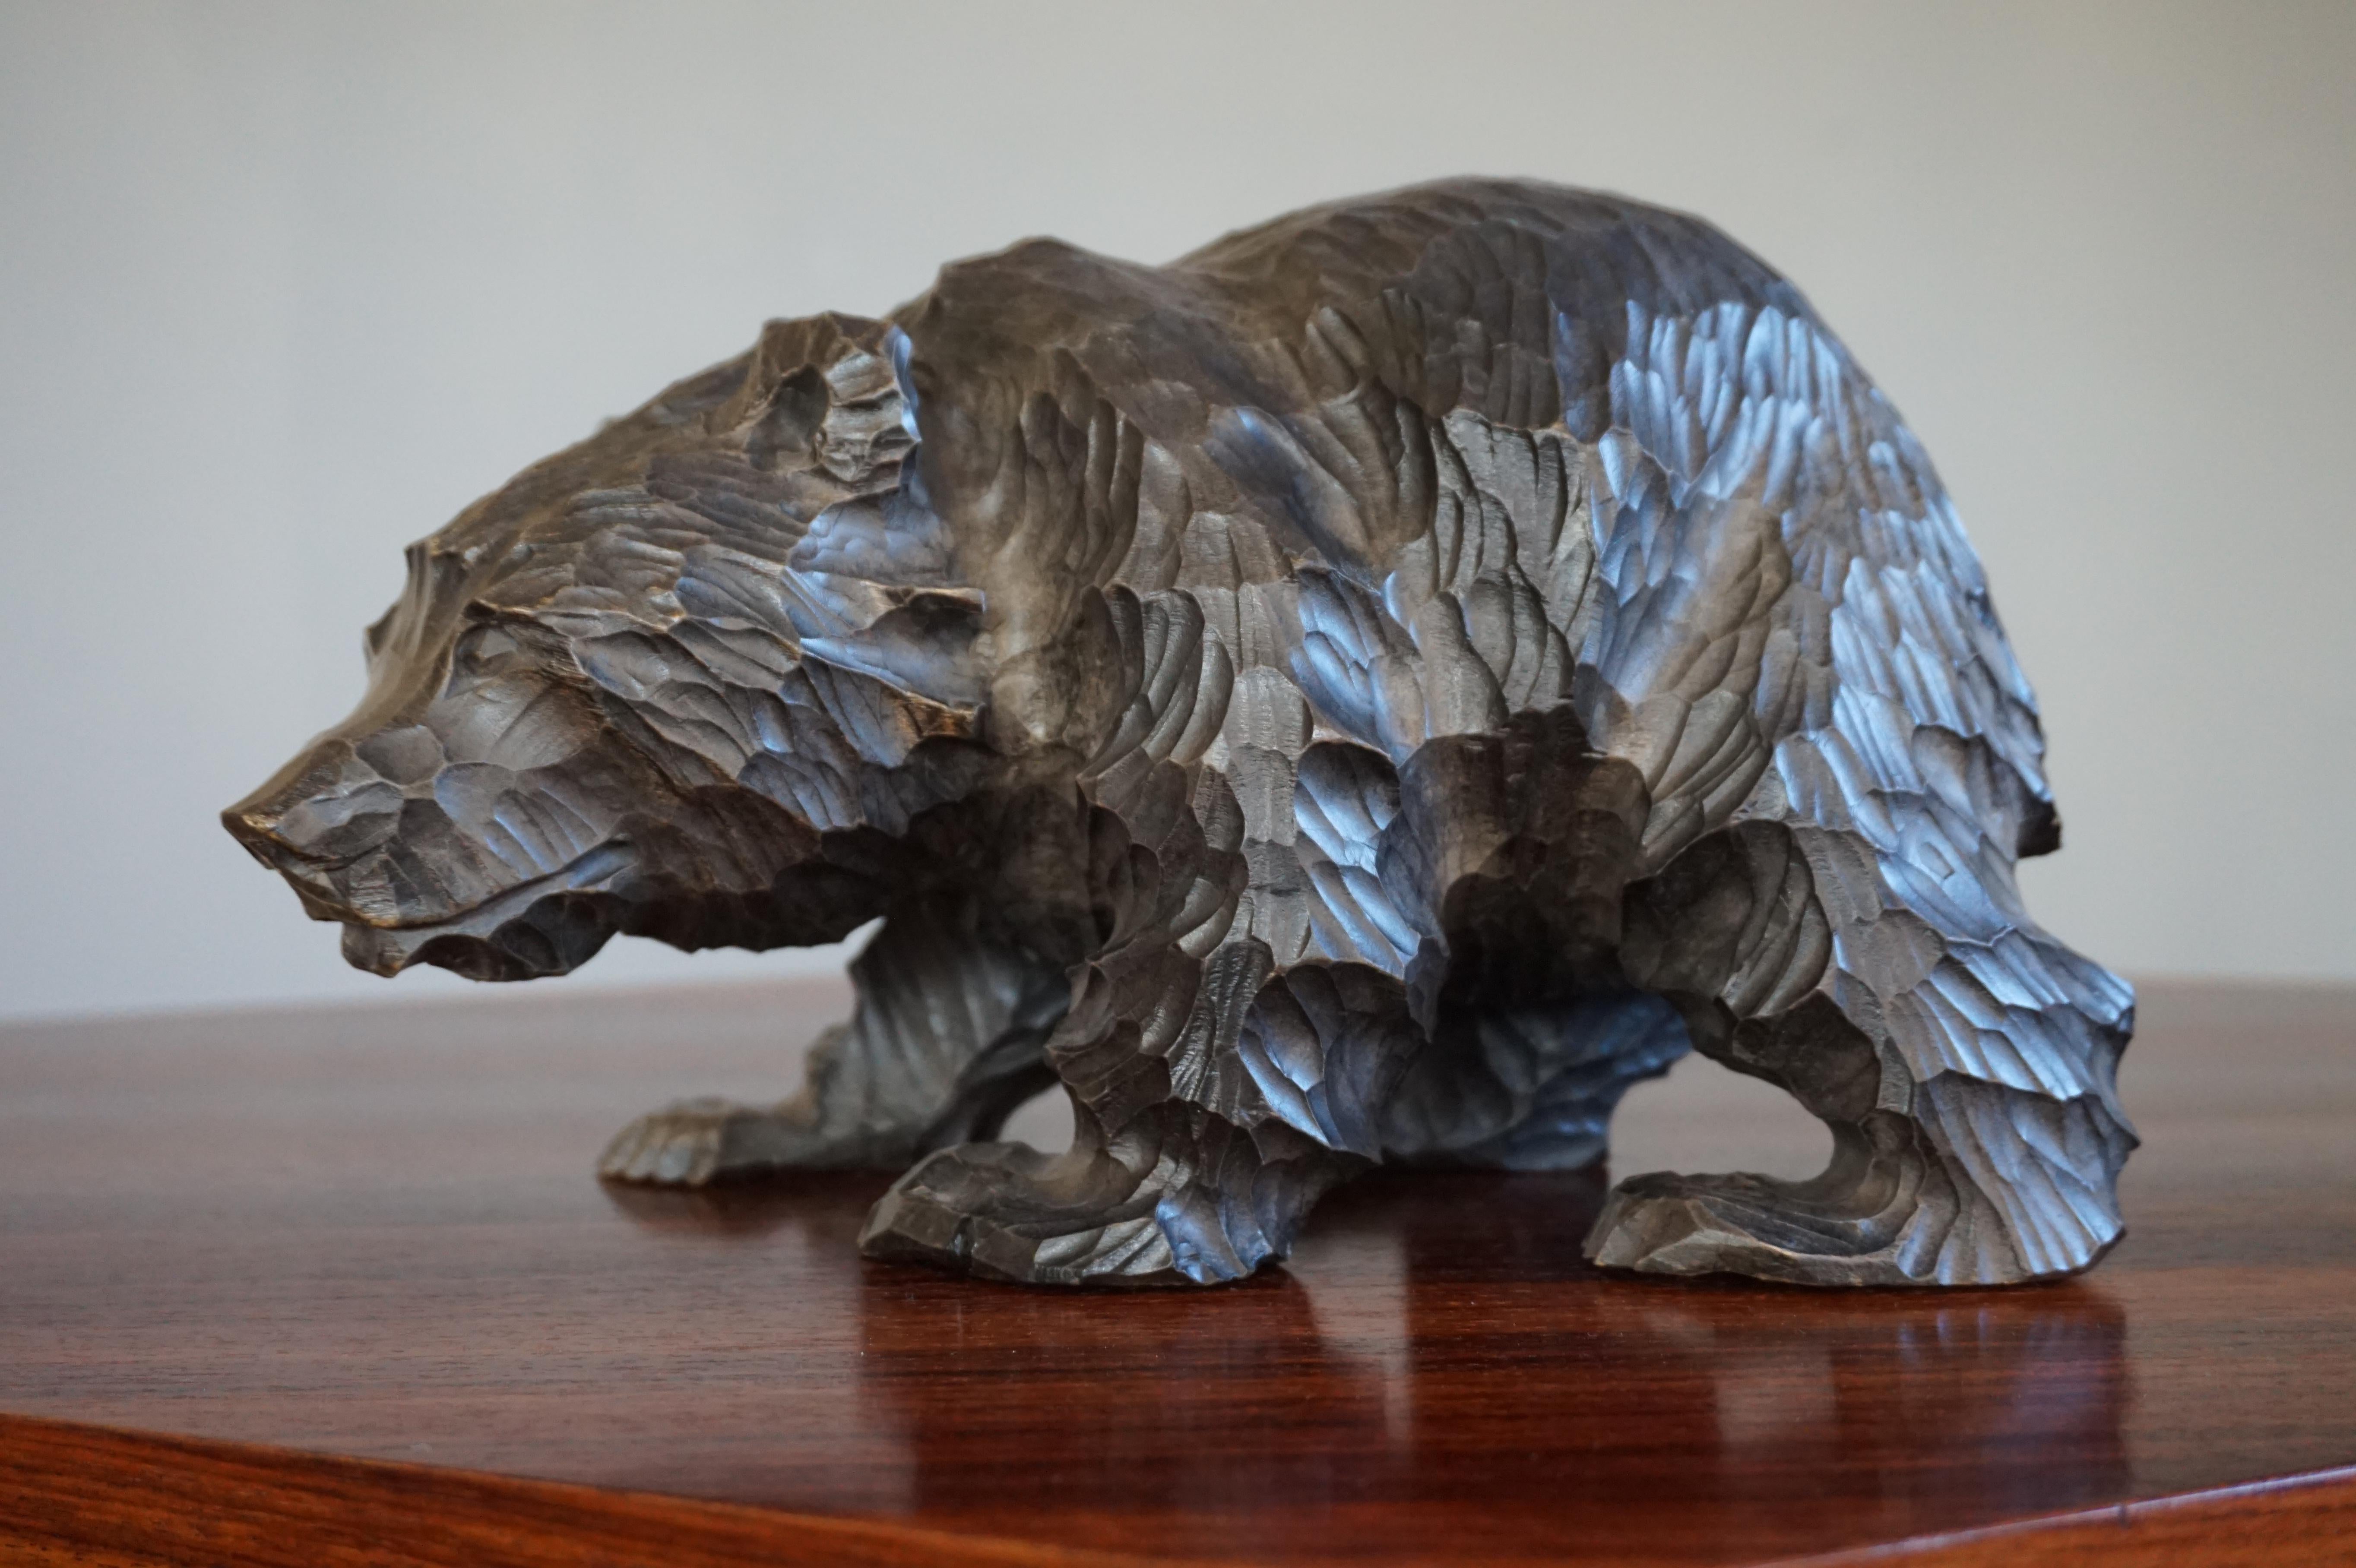 One of a kind bear sculpture.

This stunning grizly bear sculpture stands out, because the artist has managed to create a perfectly realistic bear by carving away relatively large pieces of wood with his gouge. This bear's body posture is exactly